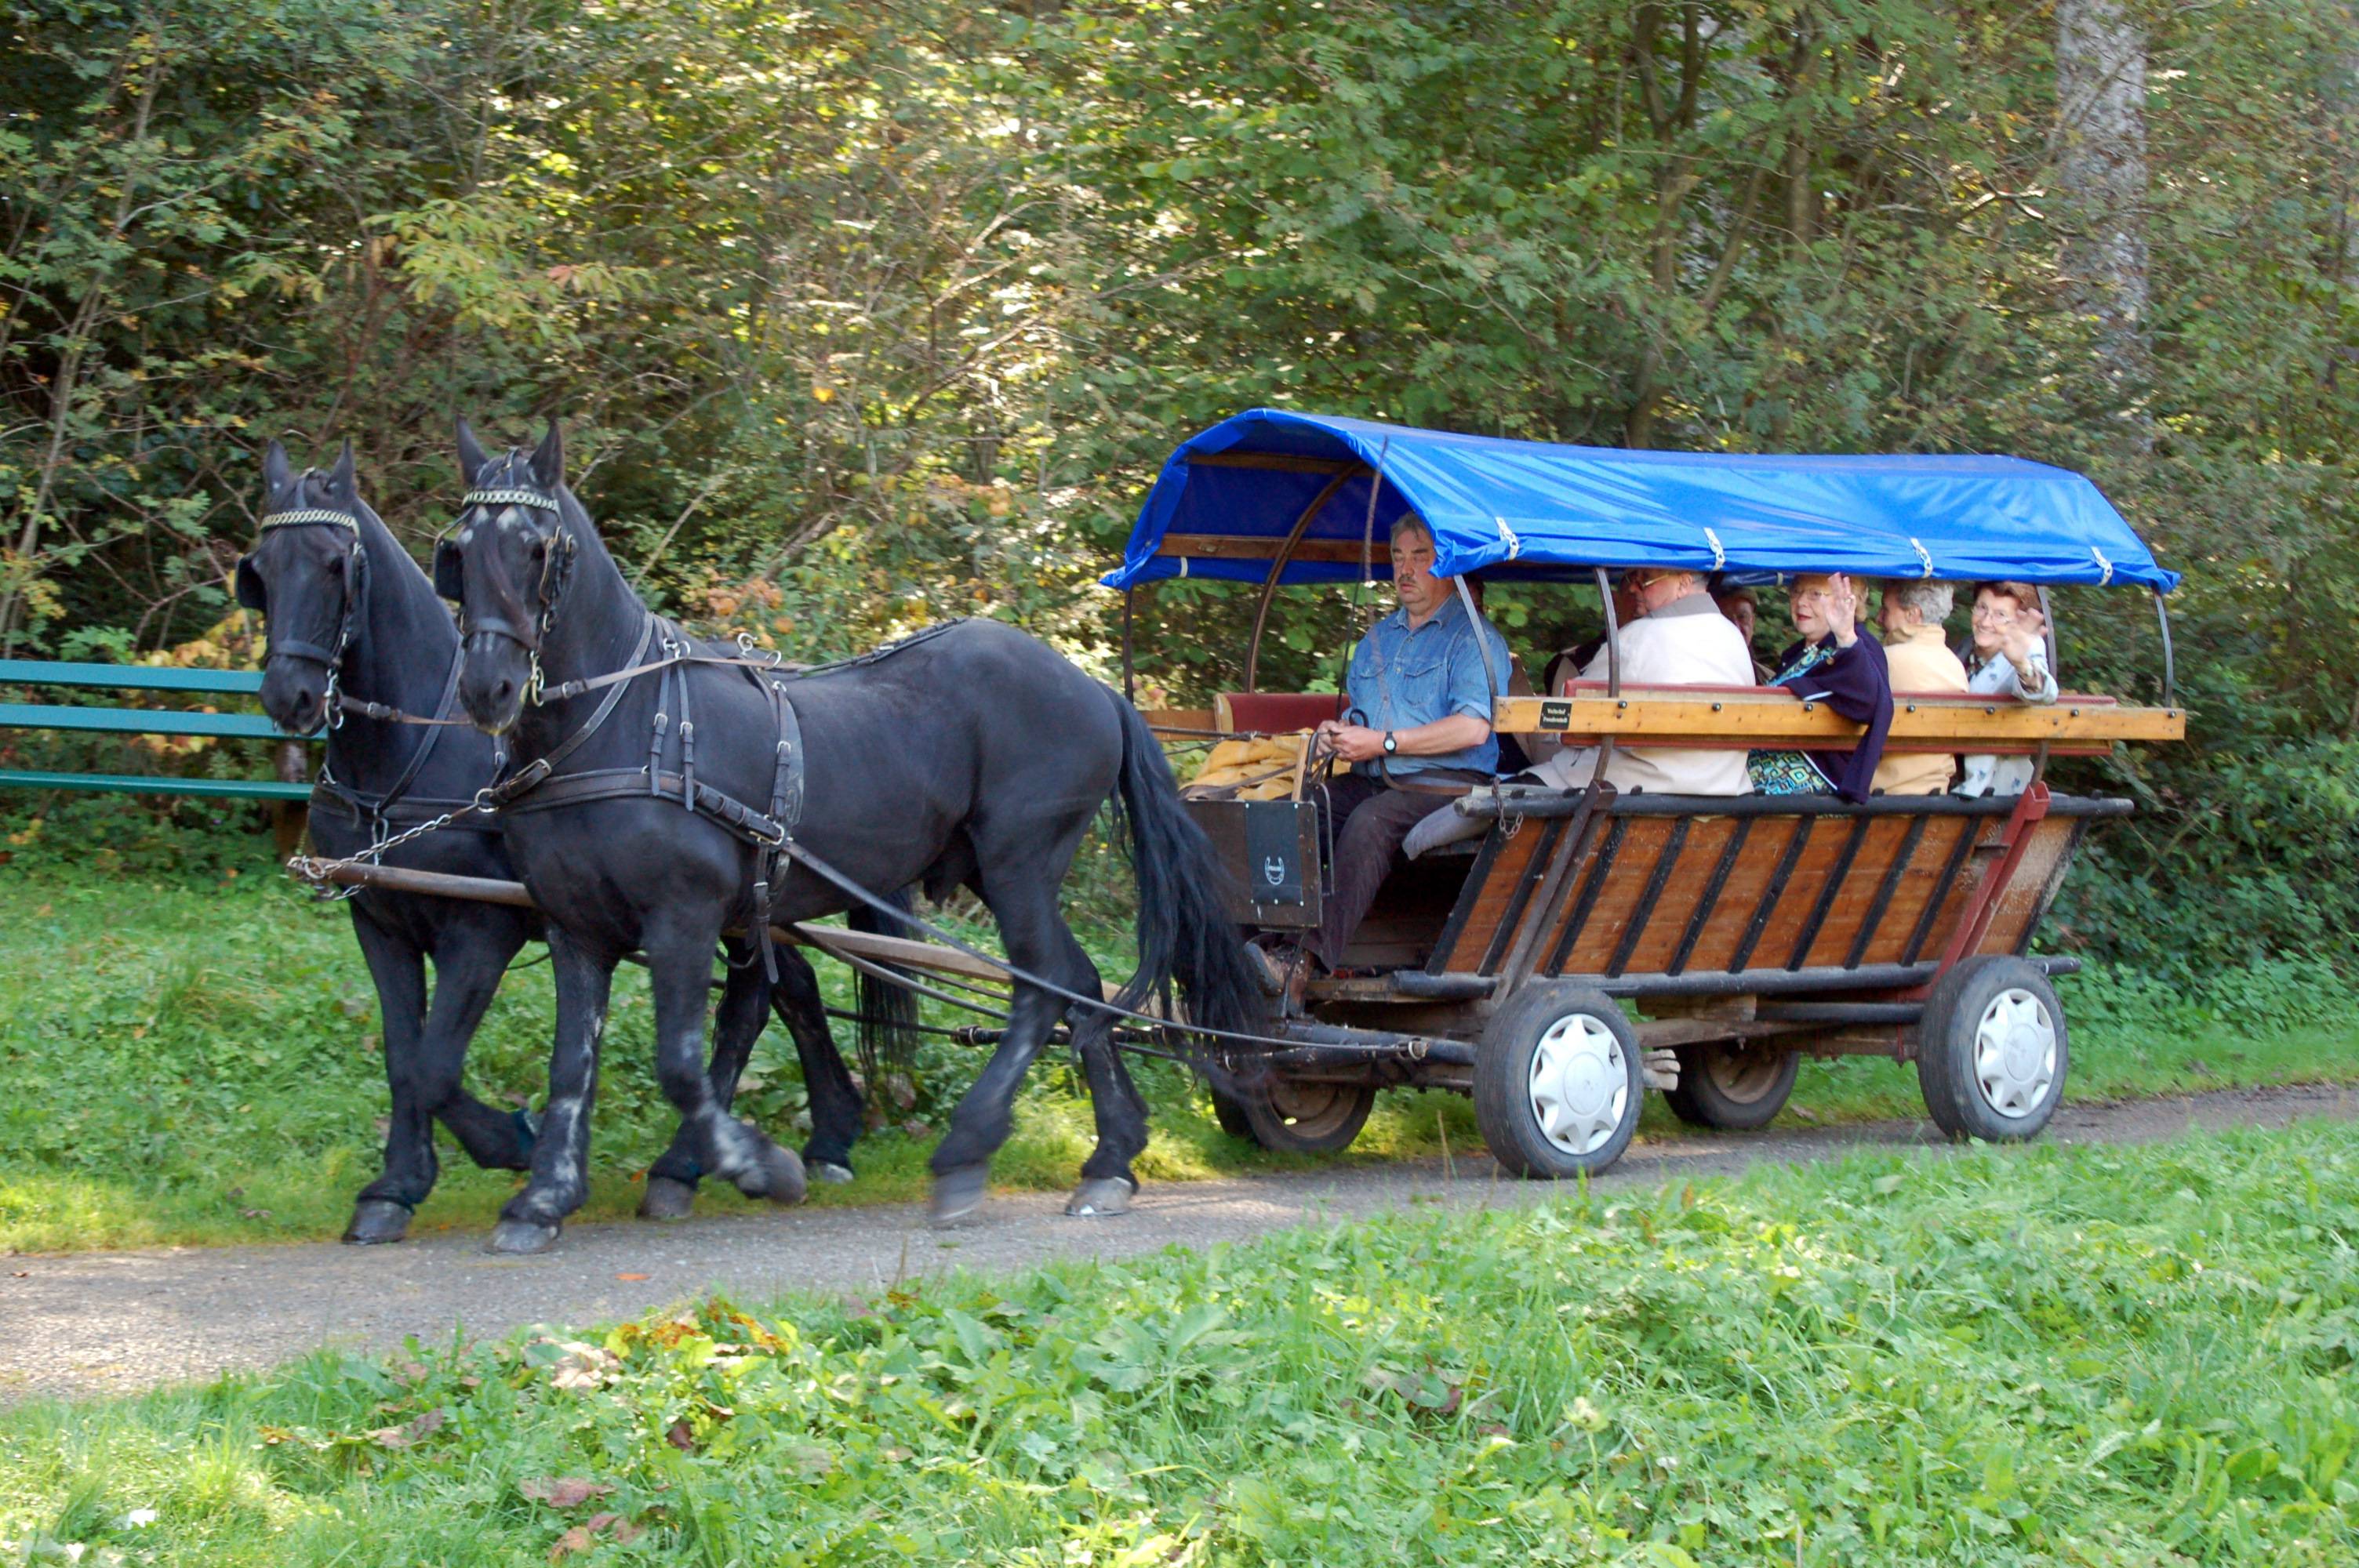 Horse carriage drives: Through the Black Forest to the beat of the horses - Wellnesshotel Grüner Wald 4*S Freudenstadt